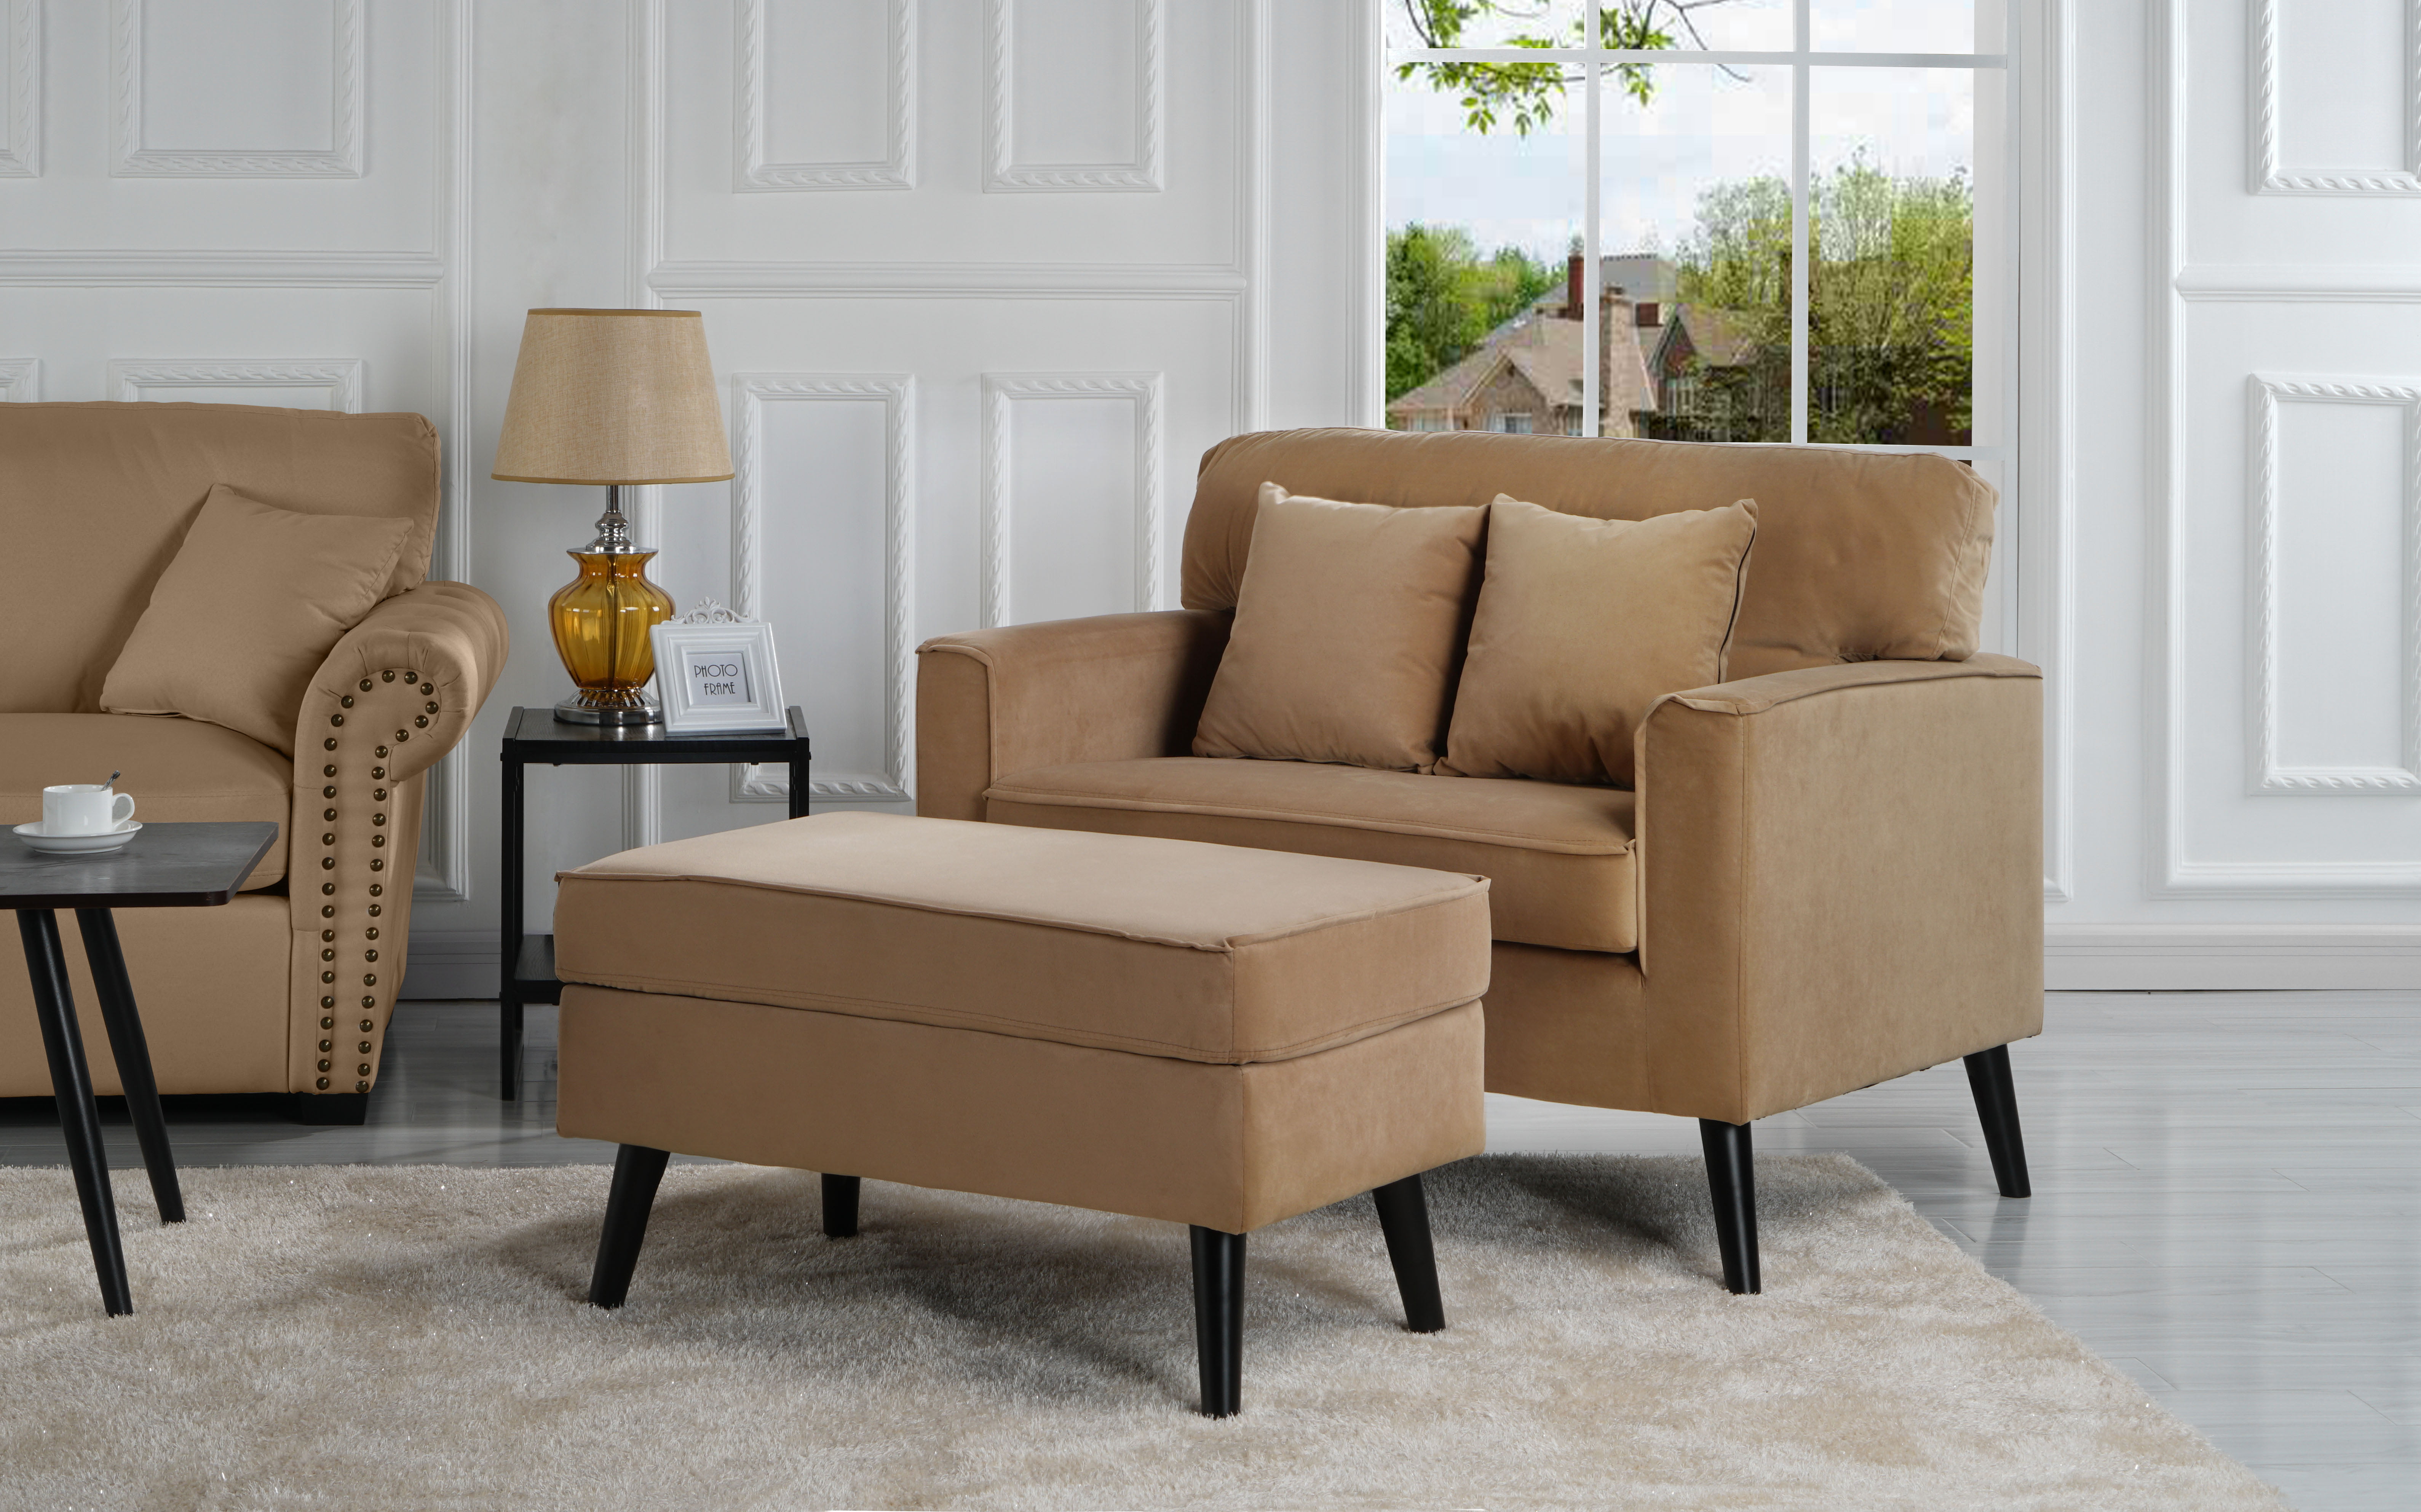 Creatice Accent Chair With Ottoman Modern for Living room